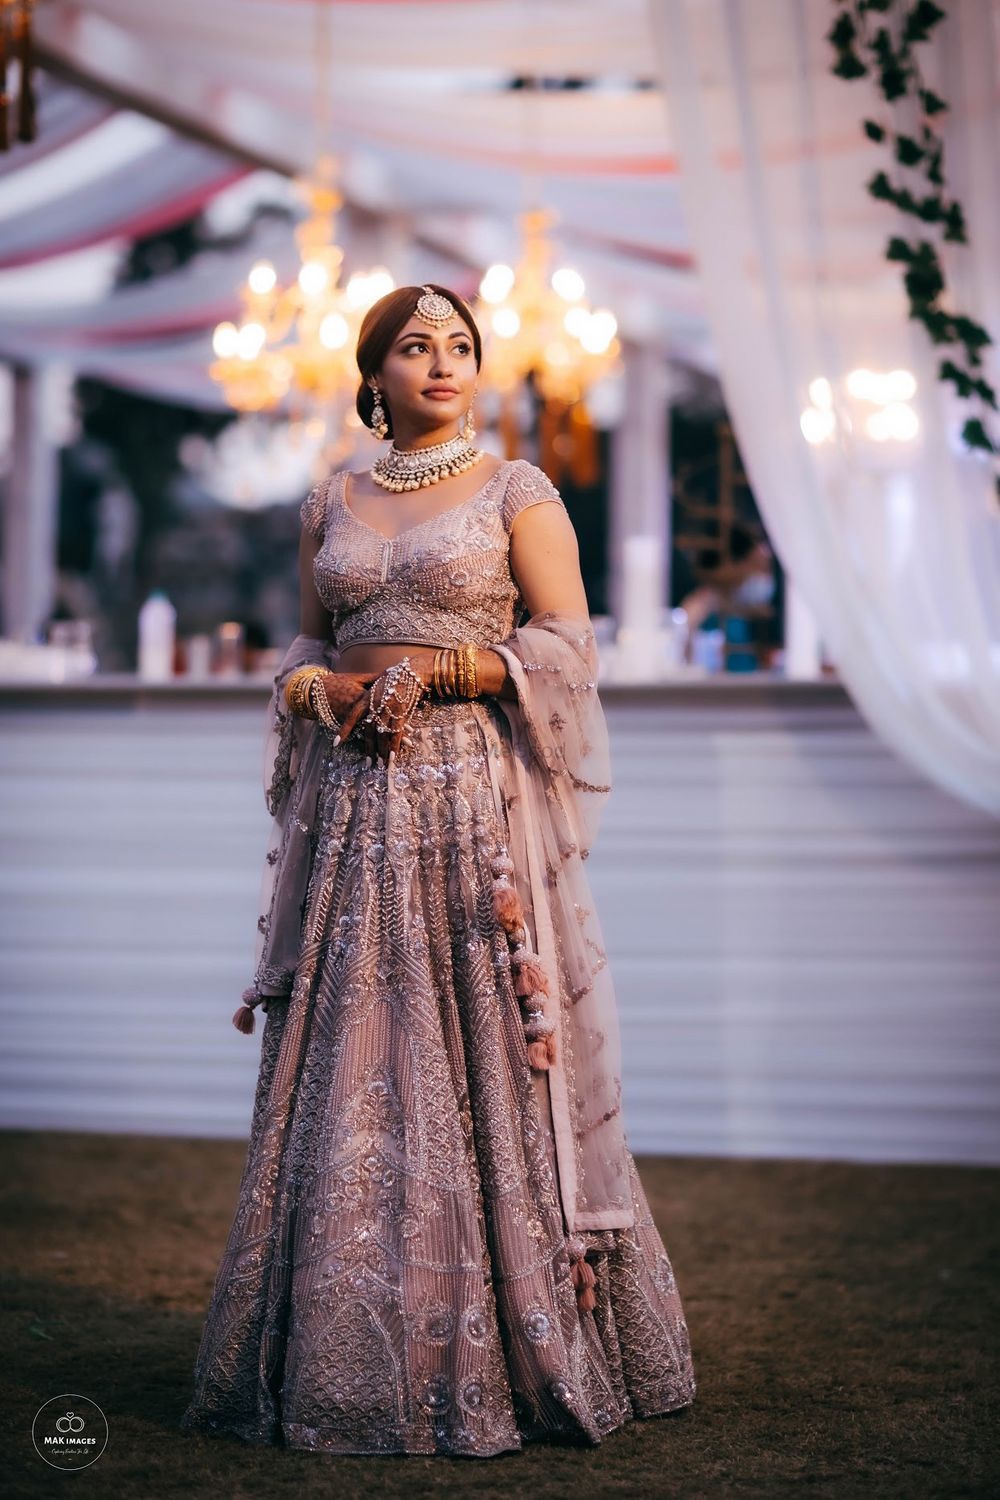 Photo of Candid click of a bride wearing a silver lehenga.